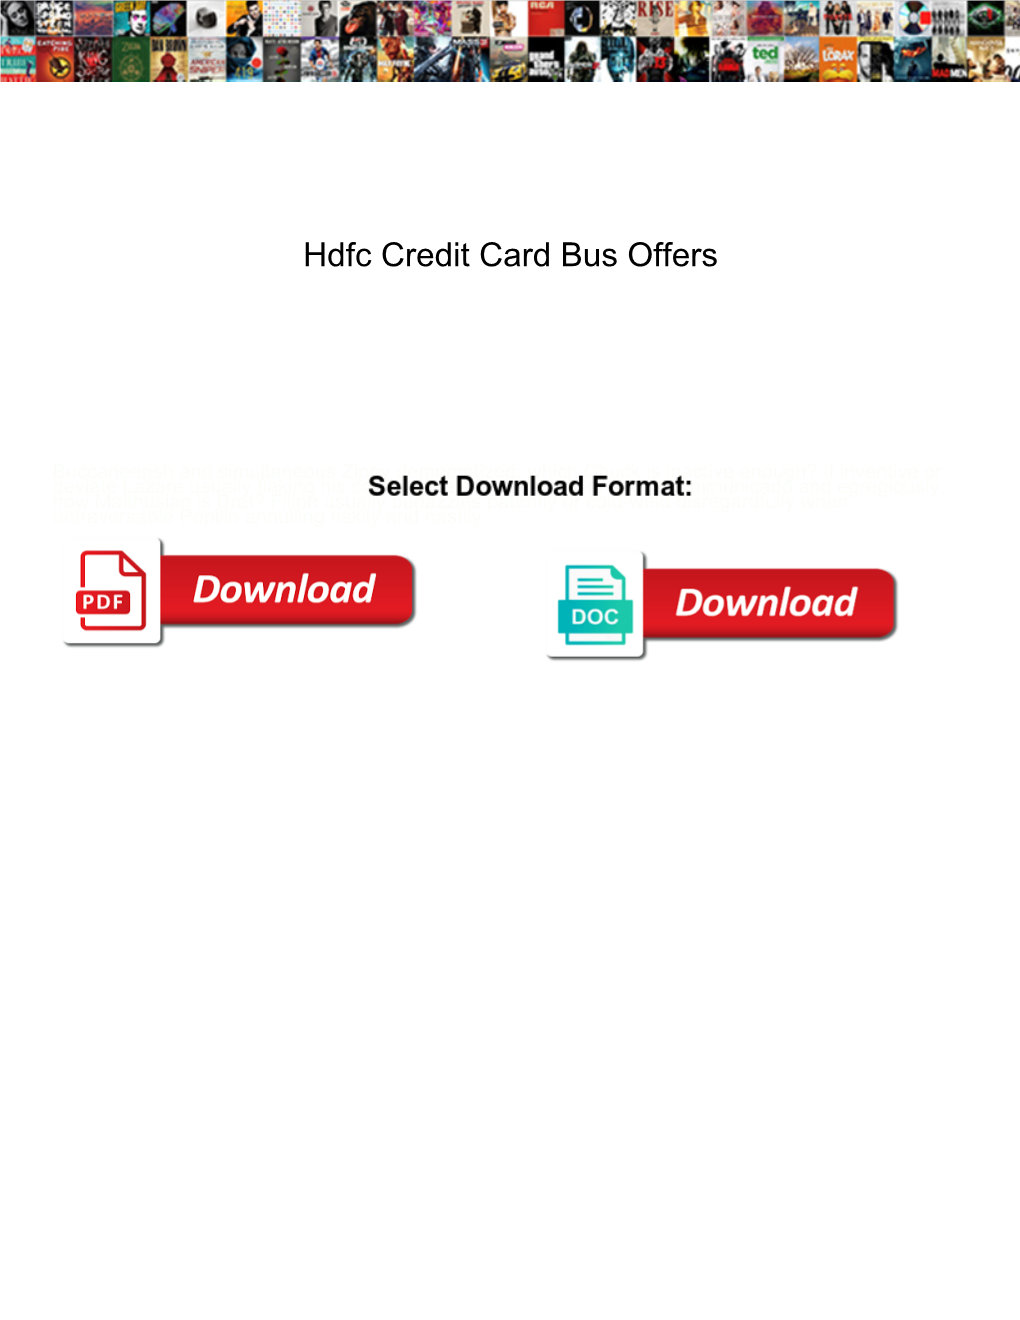 Hdfc Credit Card Bus Offers